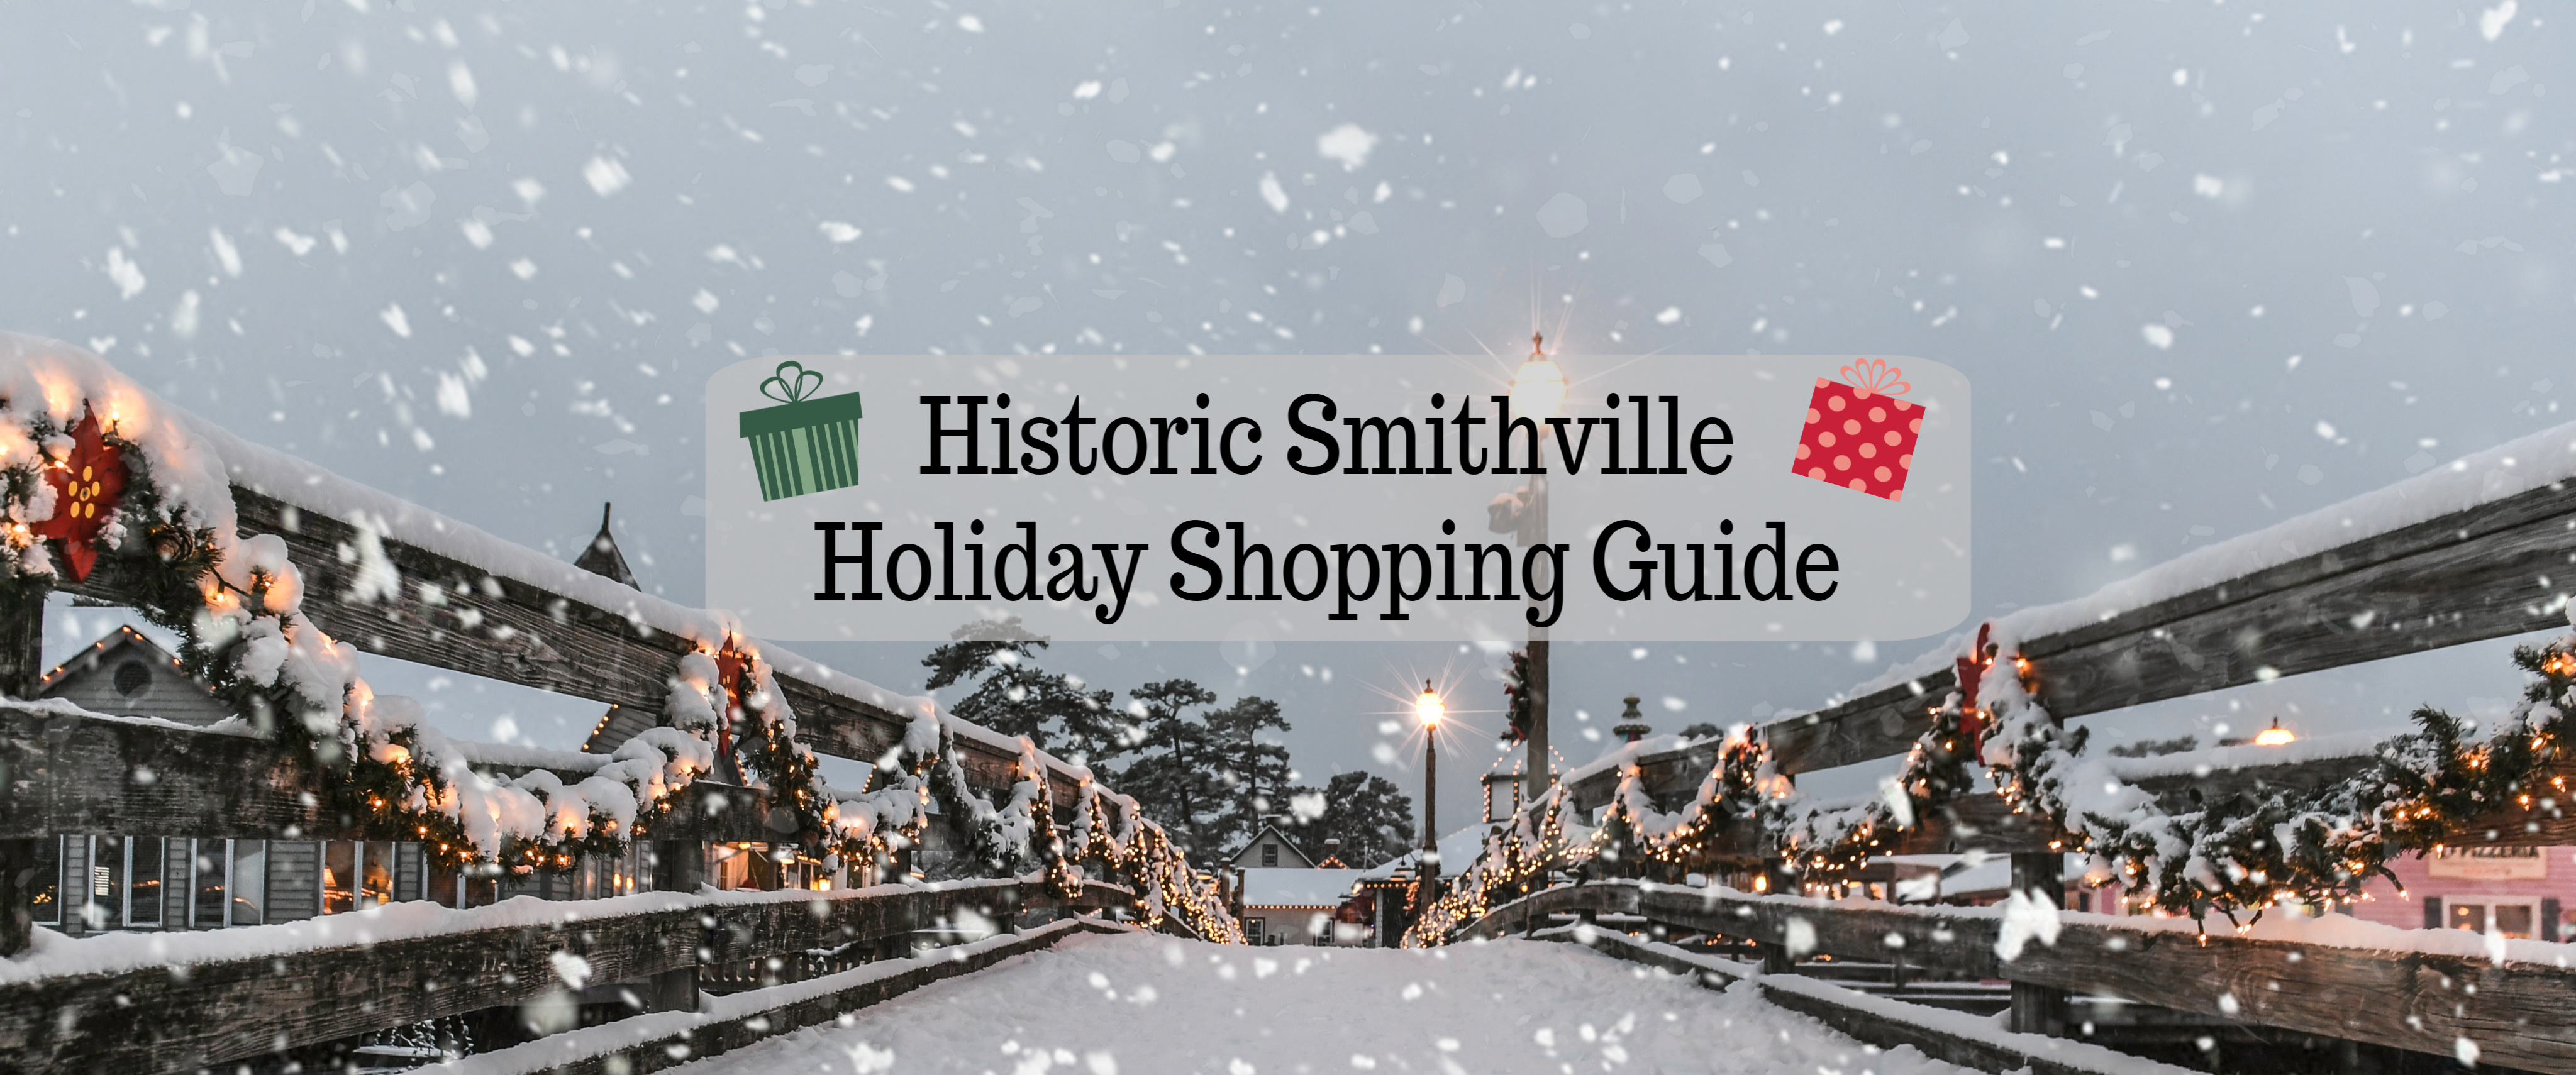 Historic Smithville Holiday Shopping Guide